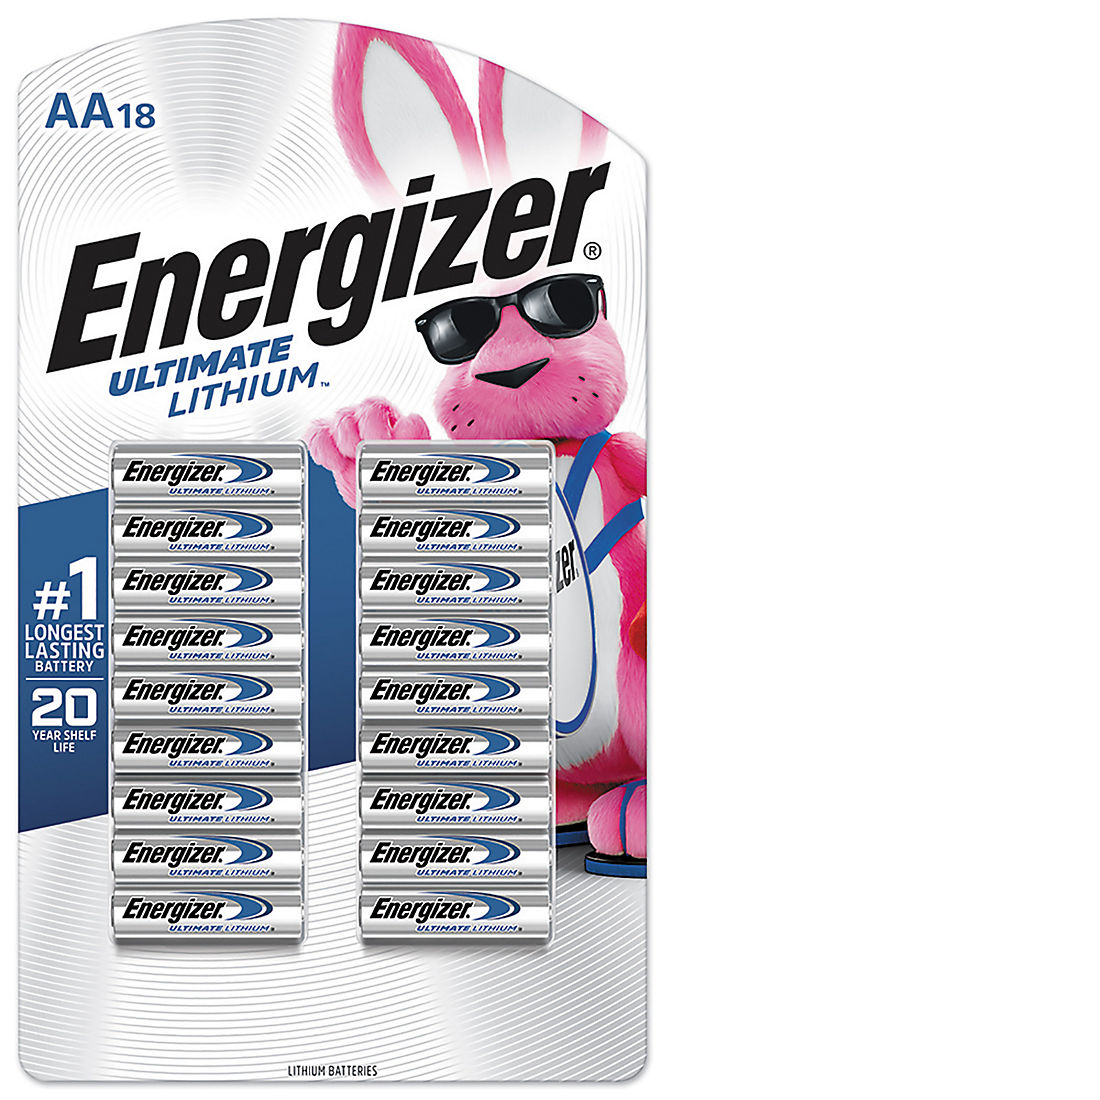 Energizer Ultimate Lithium AA Batteries, 18 ct.